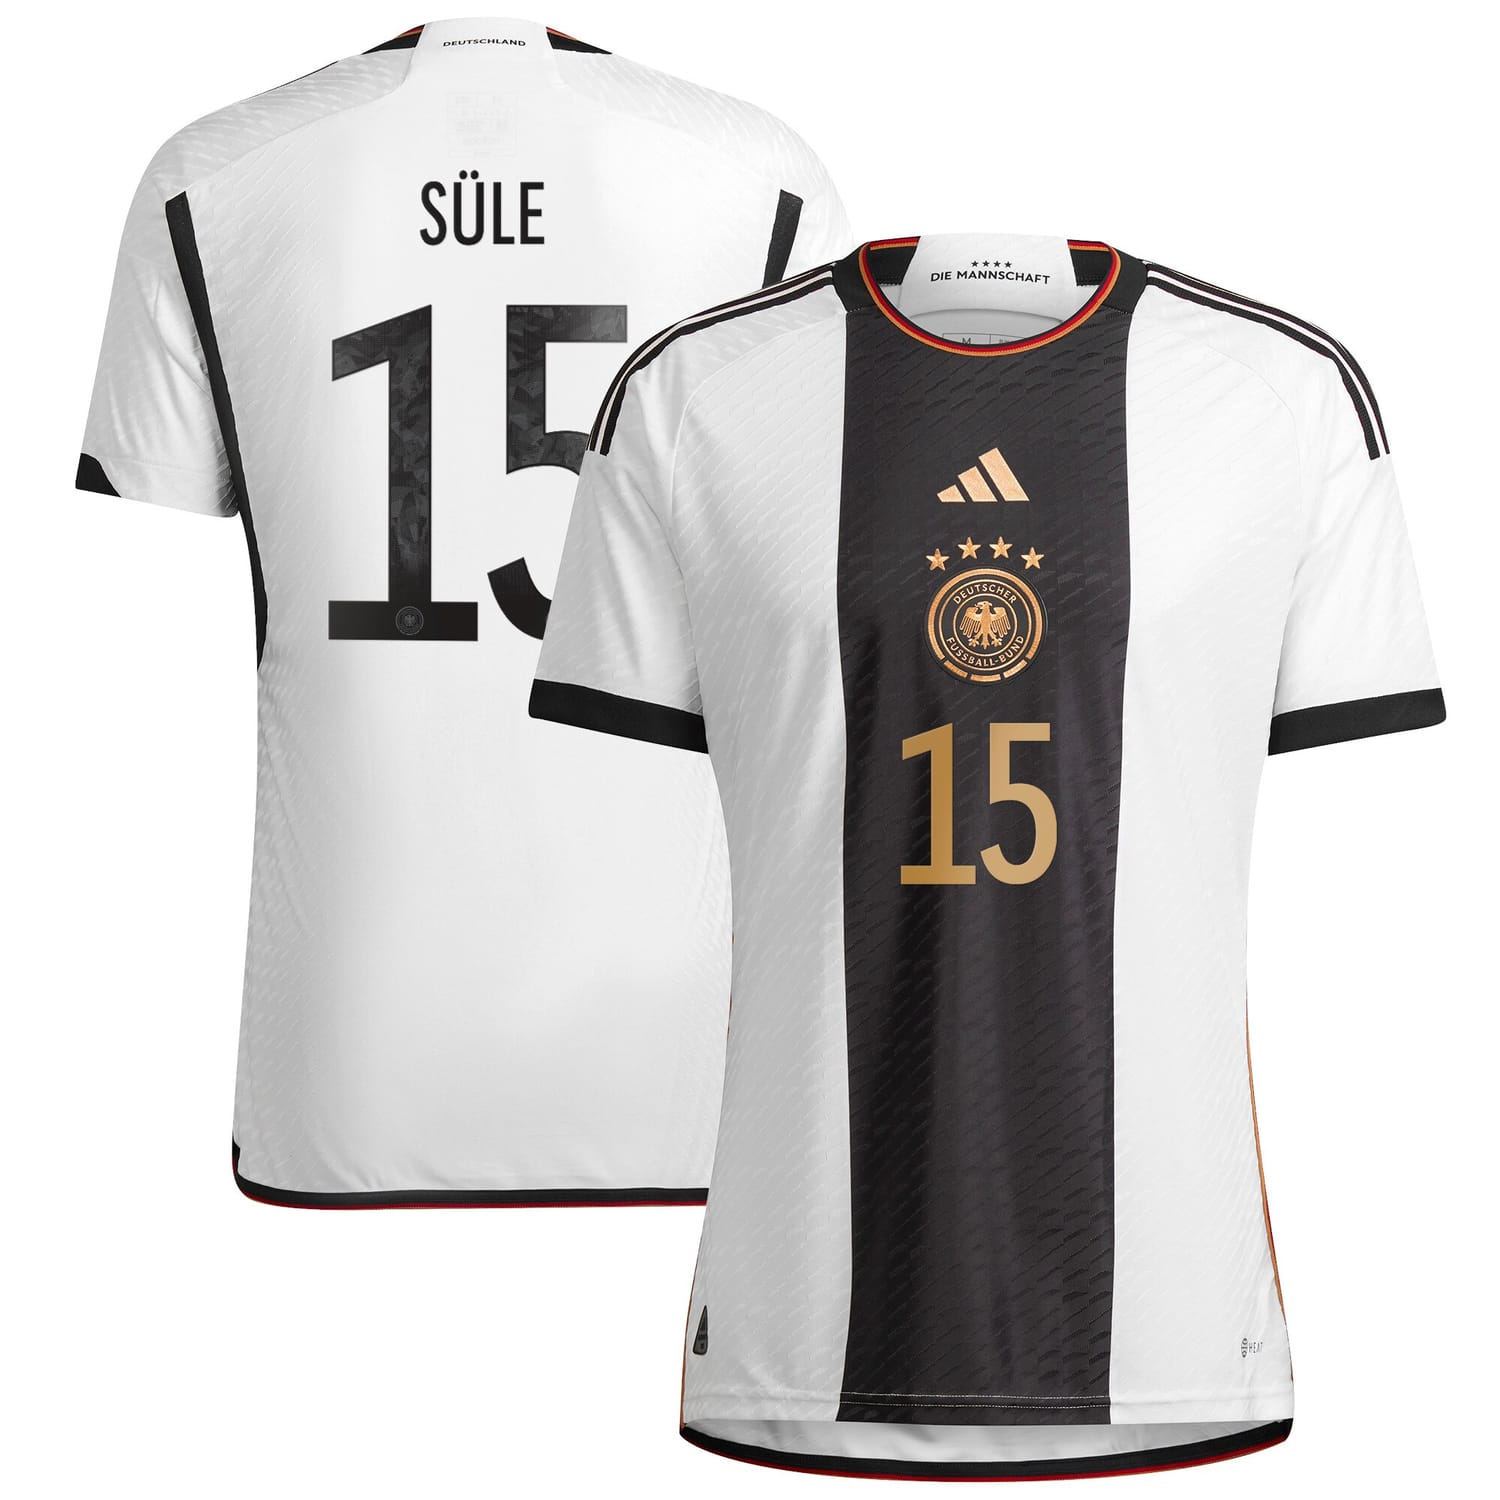 Germany National Team Home Authentic Jersey Shirt player Niklas Süle 15 printing for Men